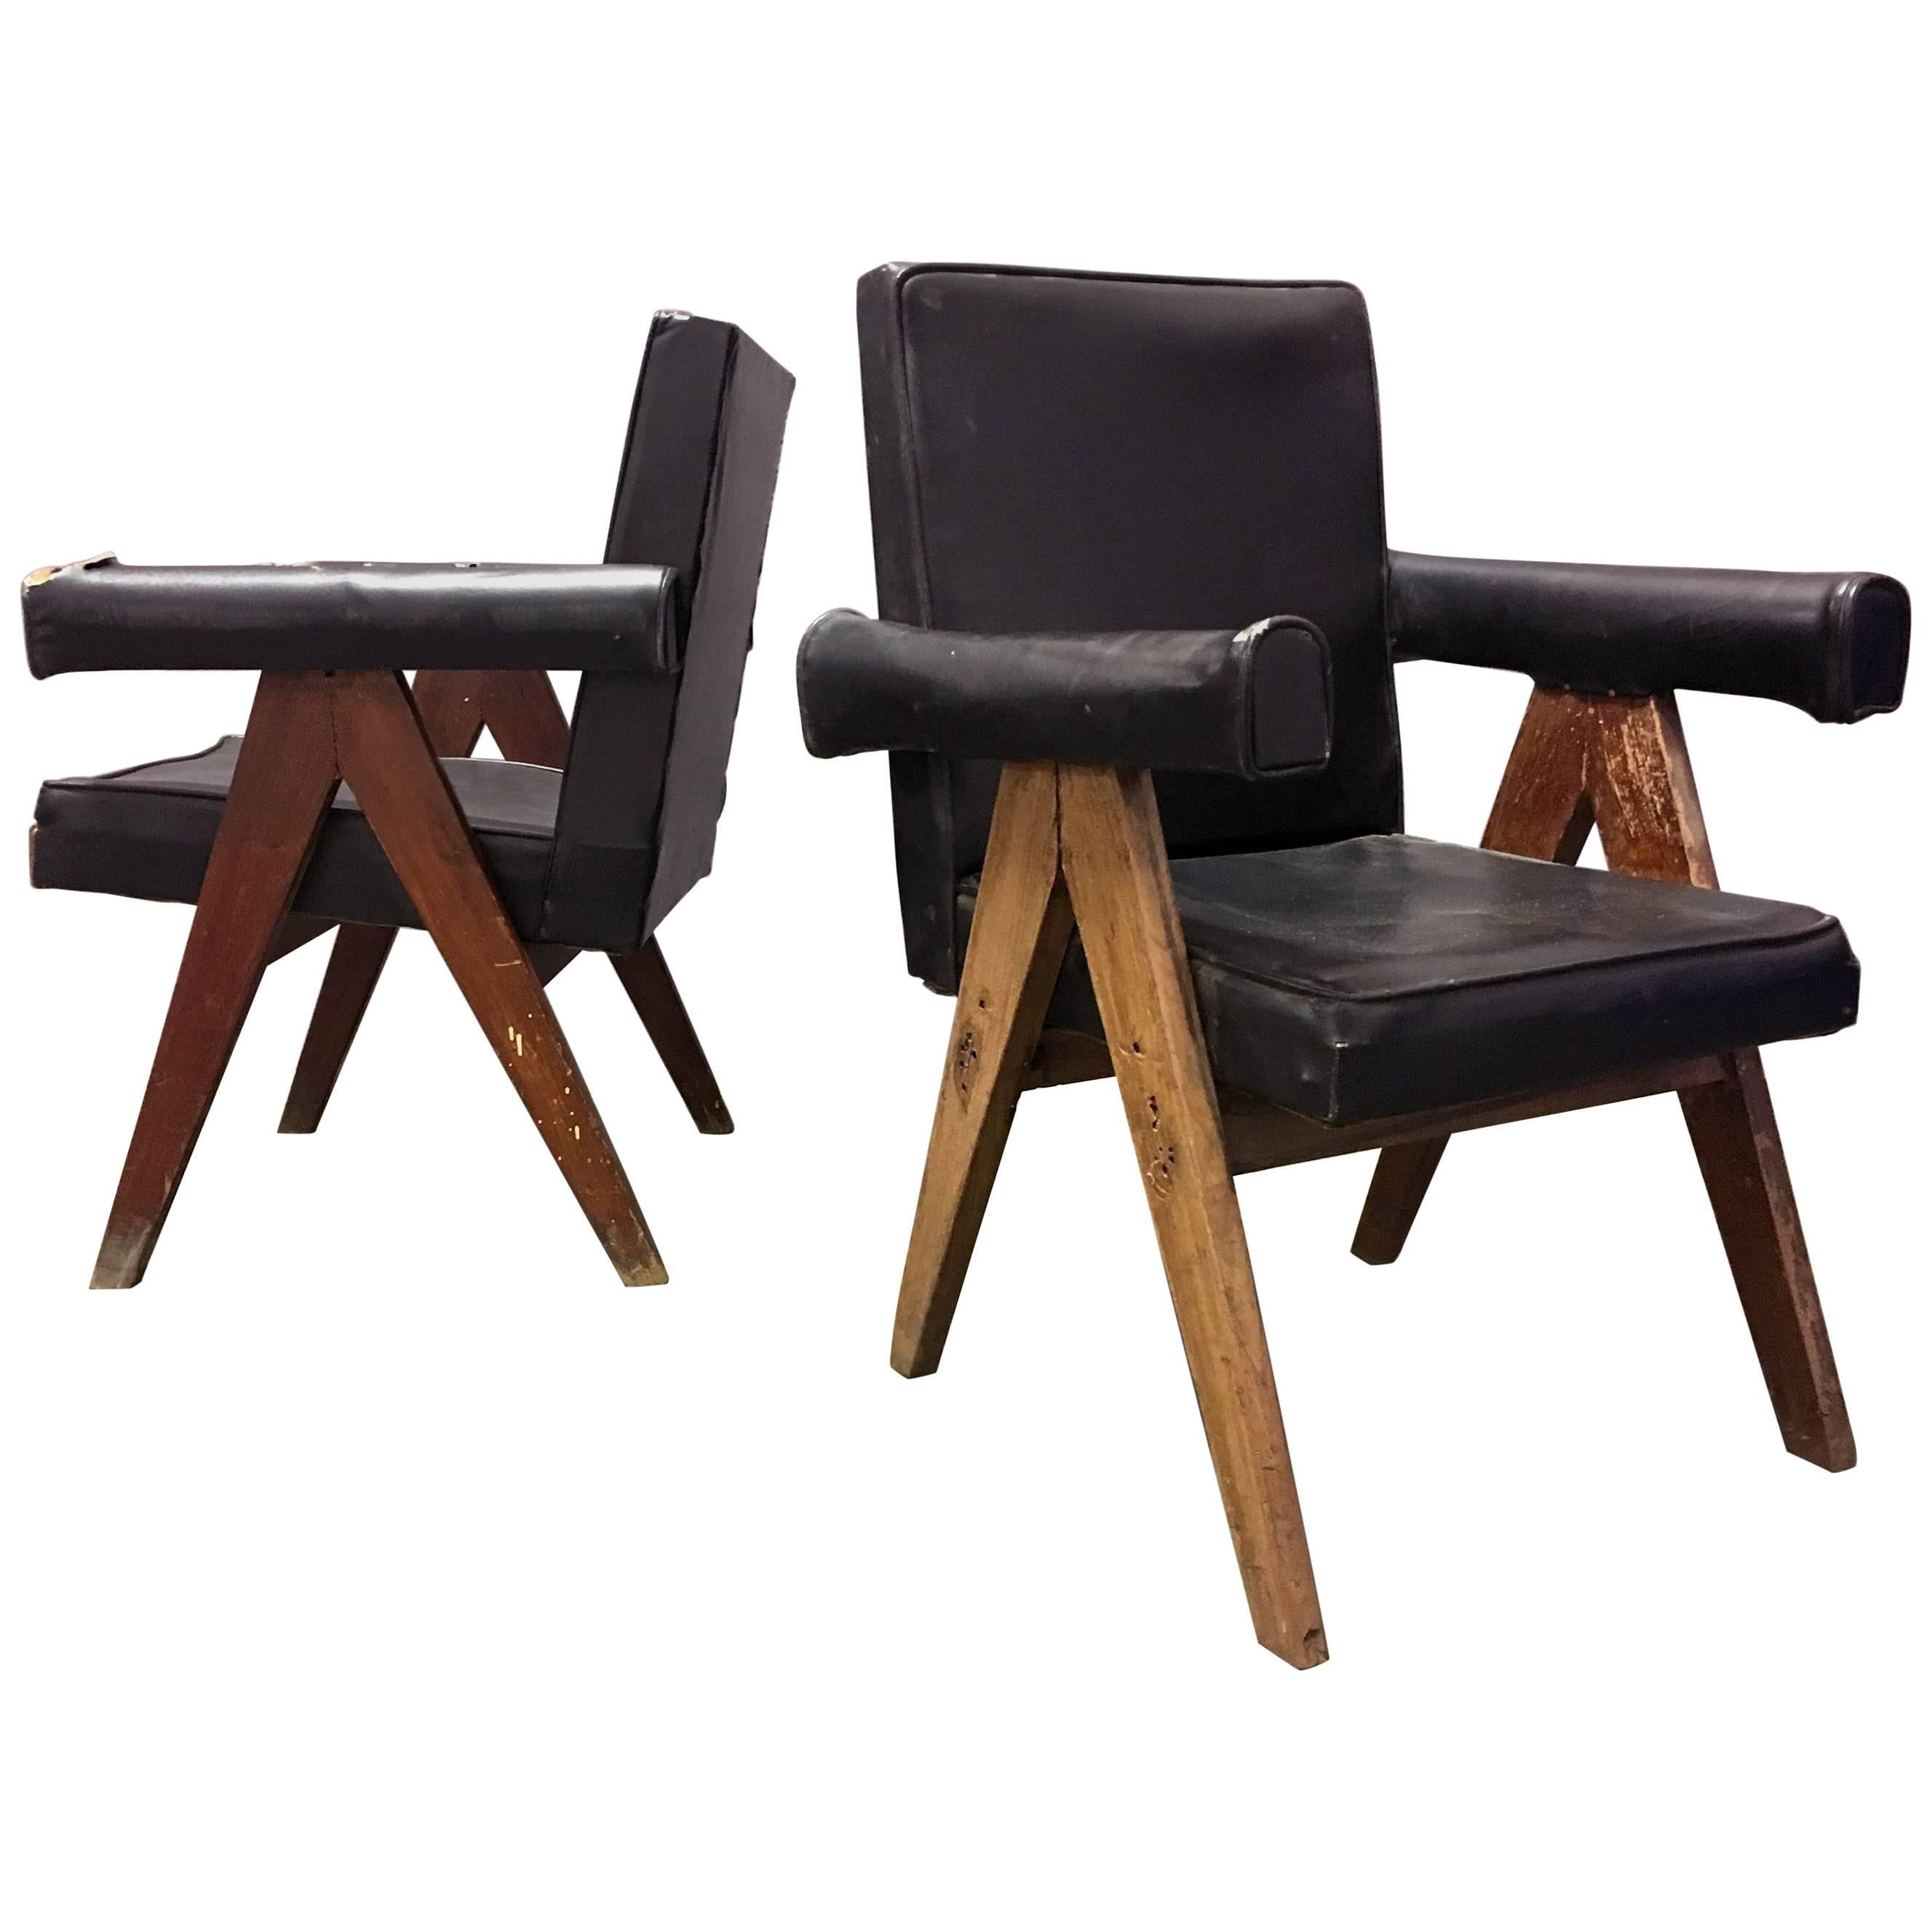 Pierre Jeanneret Pair of Unrestored Committee Chairs